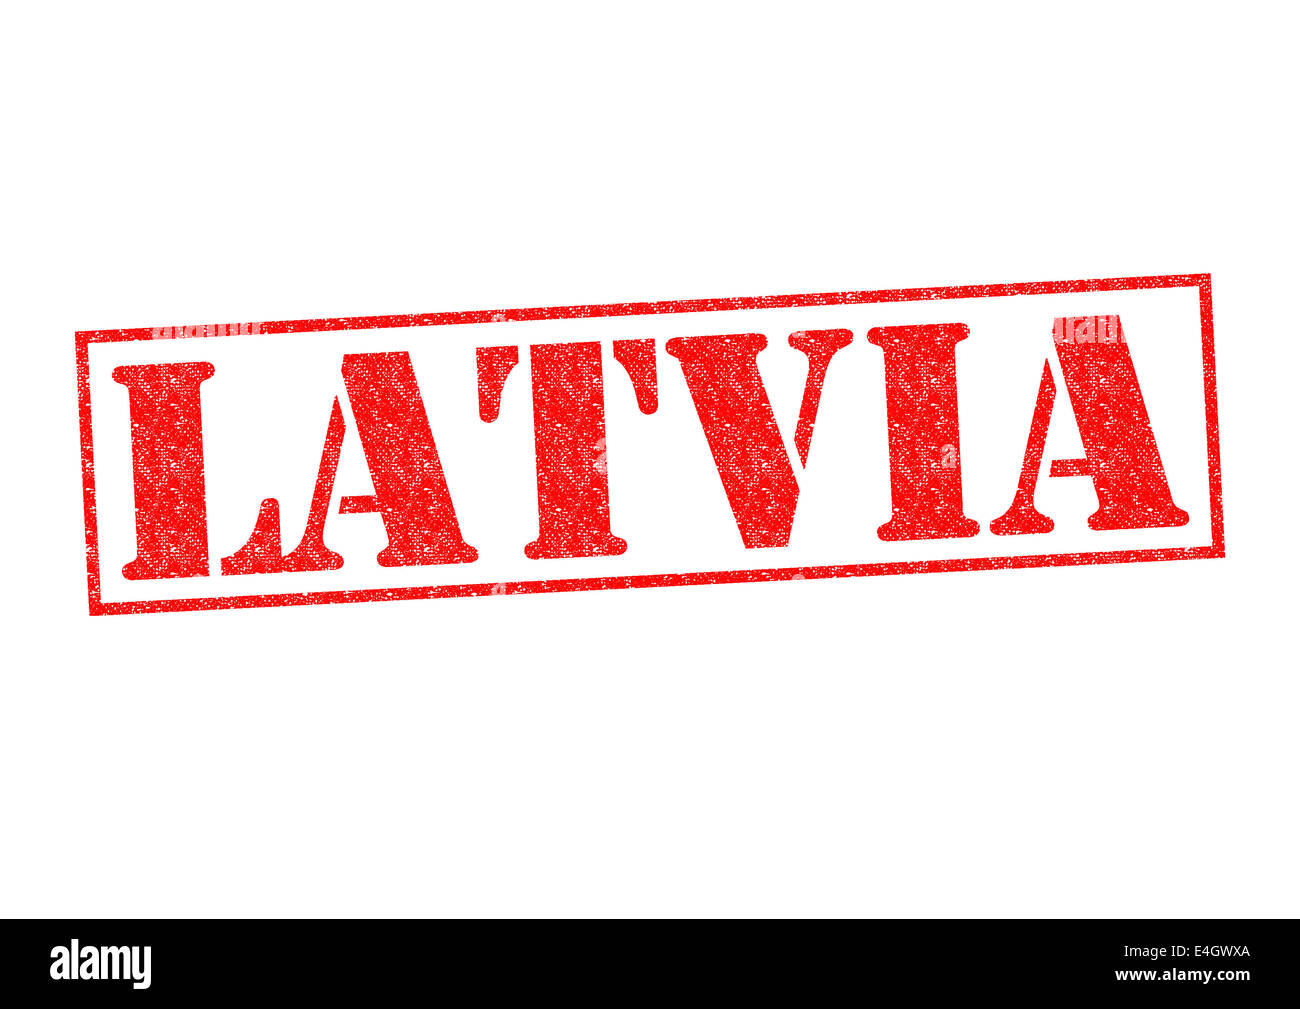 LATVIA Rubber Stamp over a white background. Stock Photo